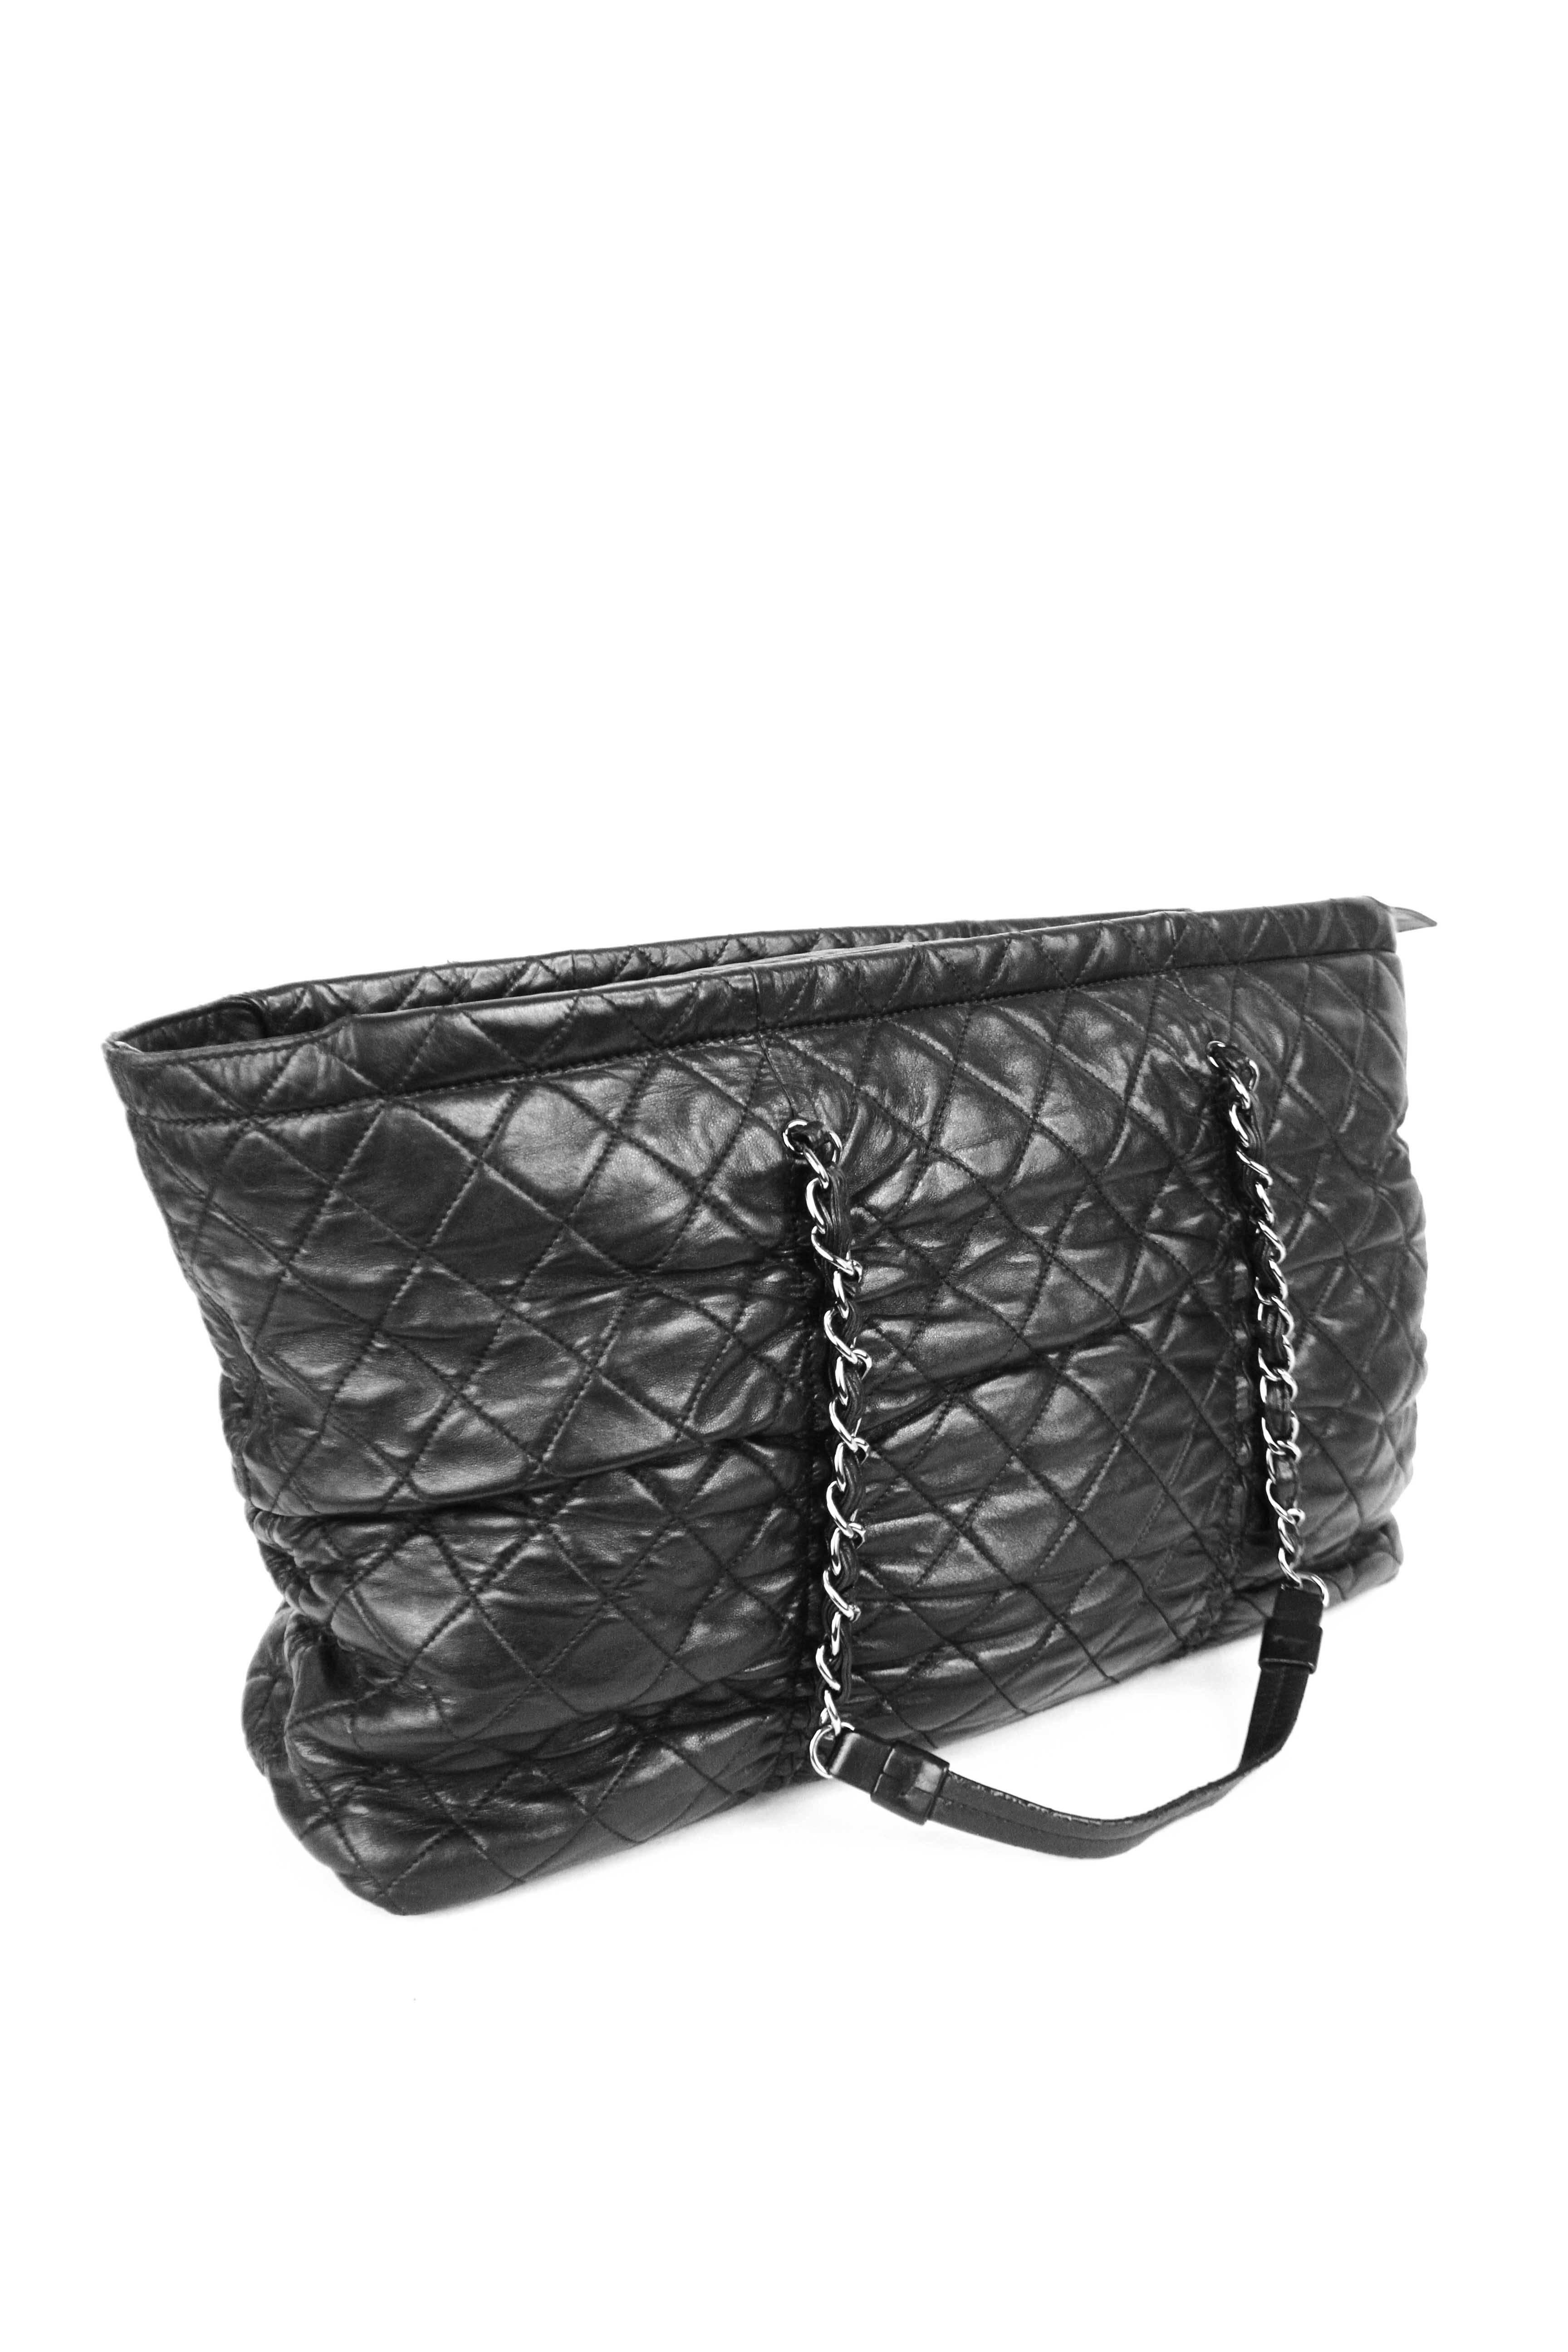 Chanel Quilted Lambskin Tote  For Sale 4